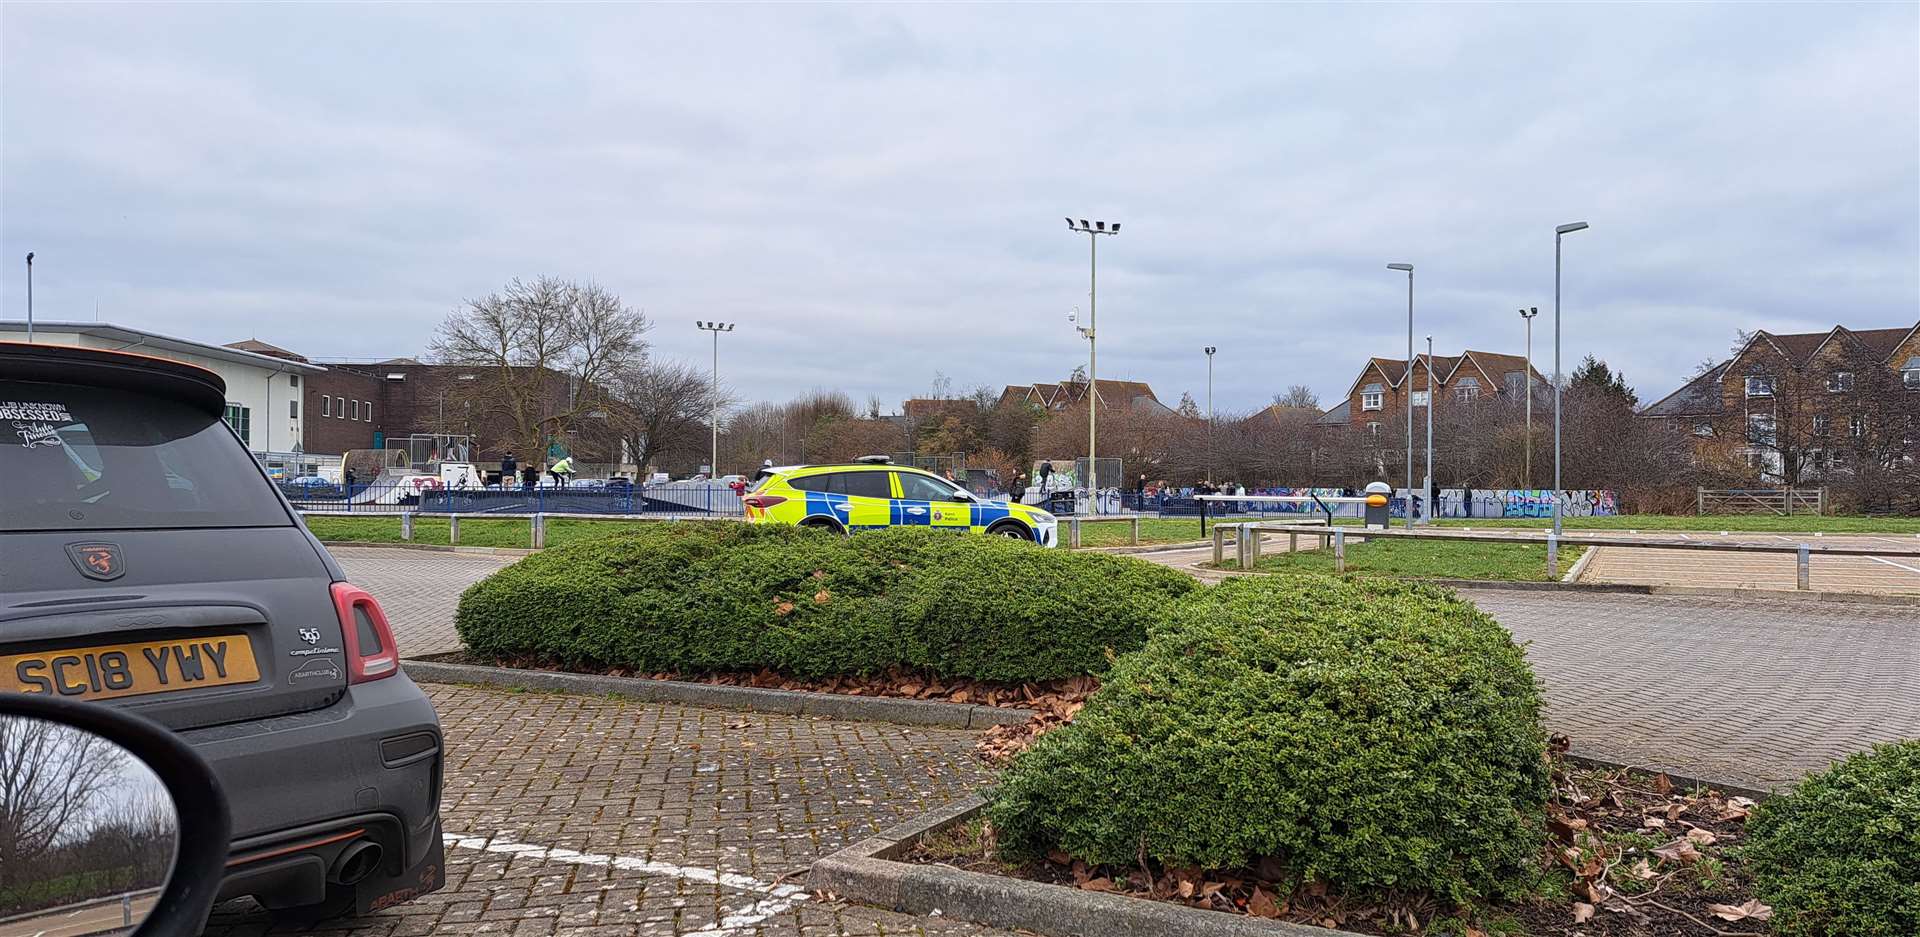 Police were called to Ashford skate park at the weekend